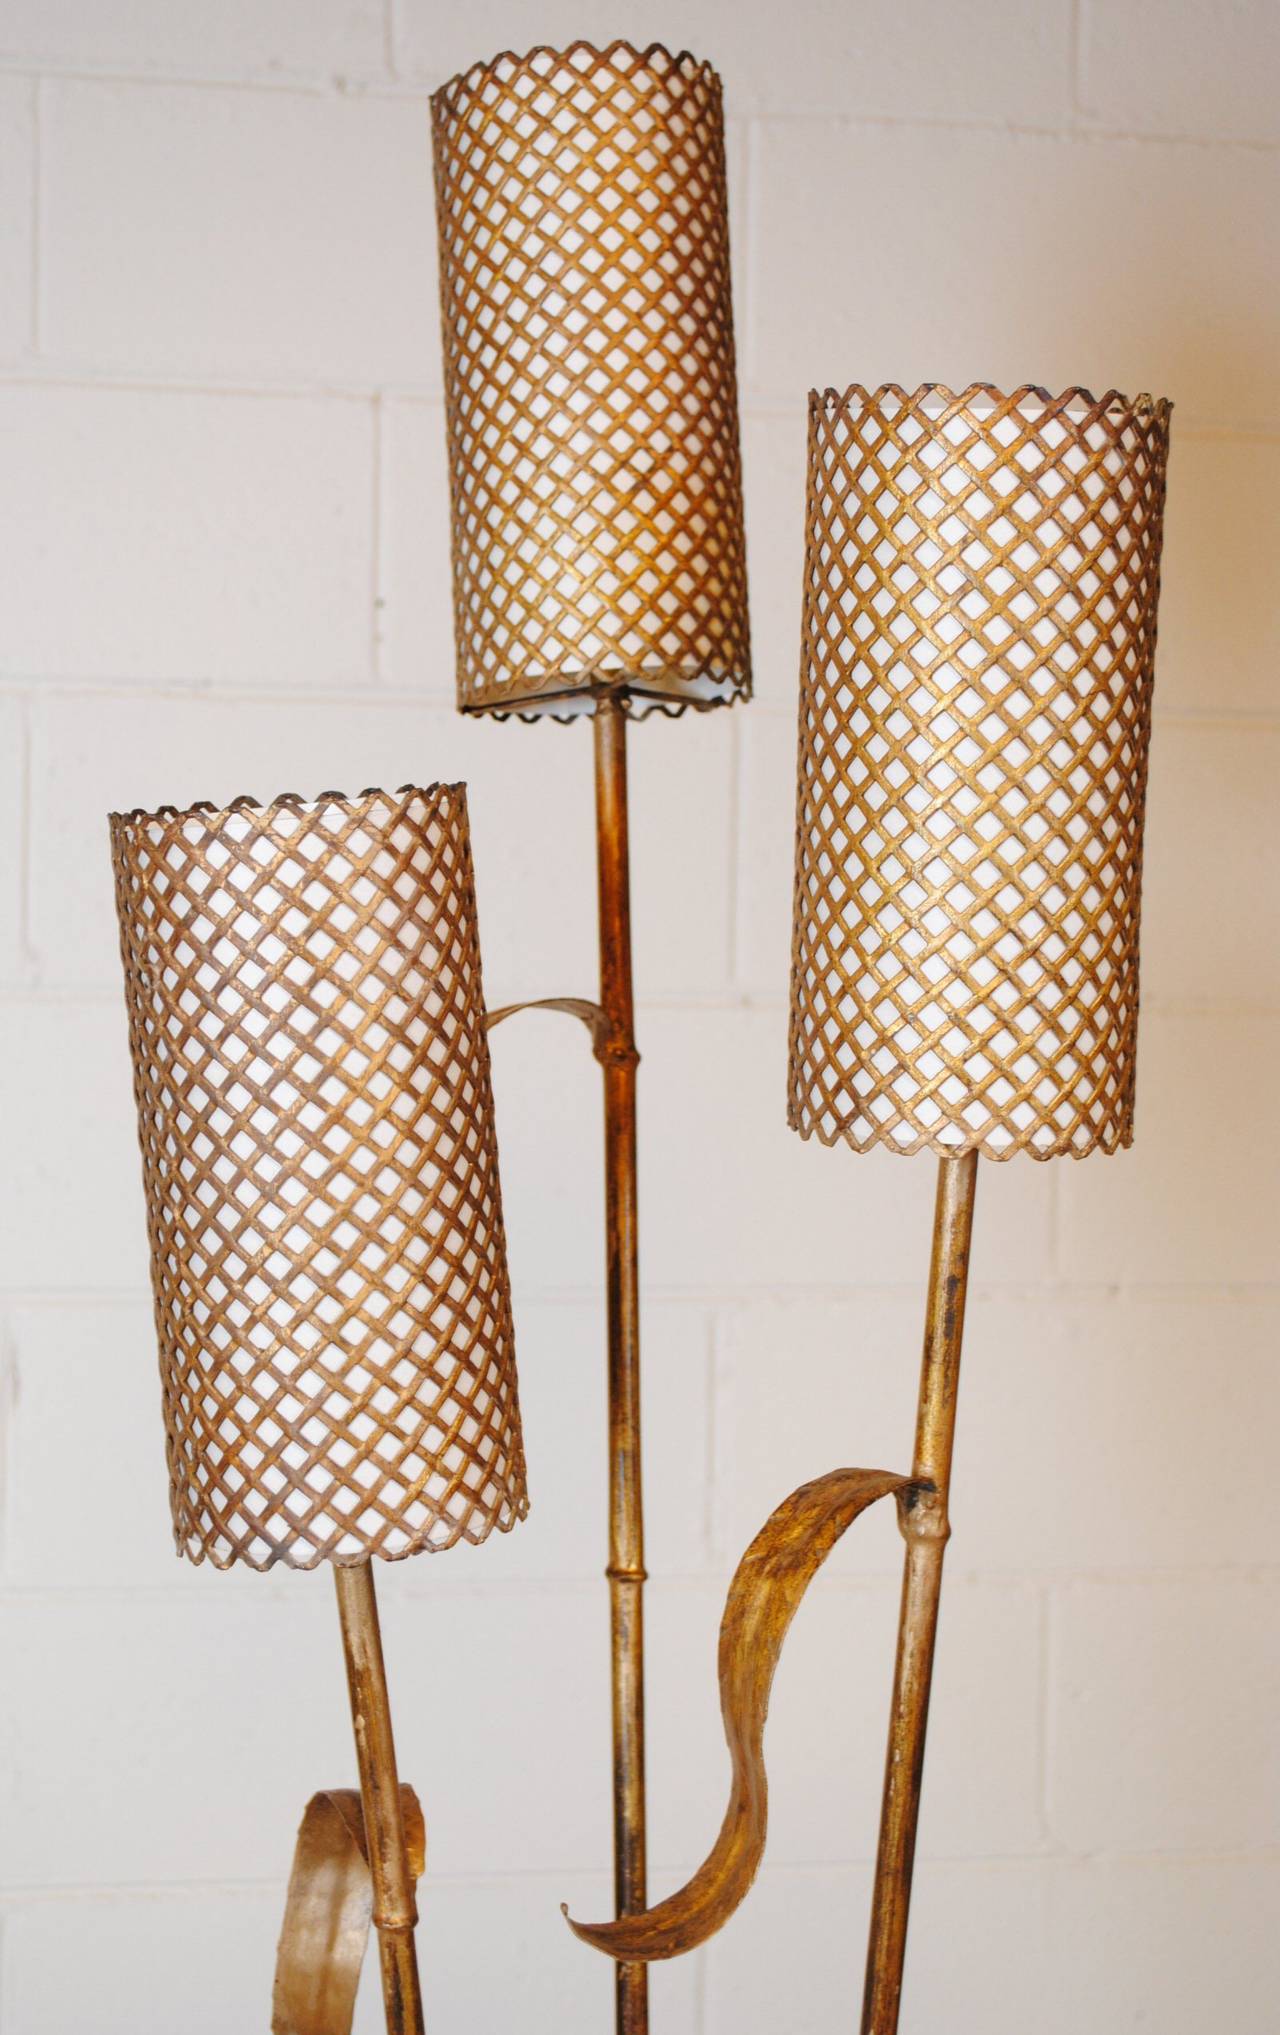 Vintage French gilt standard lamp with three branches in the form of bamboo stalks, the shades are of parchment behind perforated metal. A sweet piece dating from the 1950s.